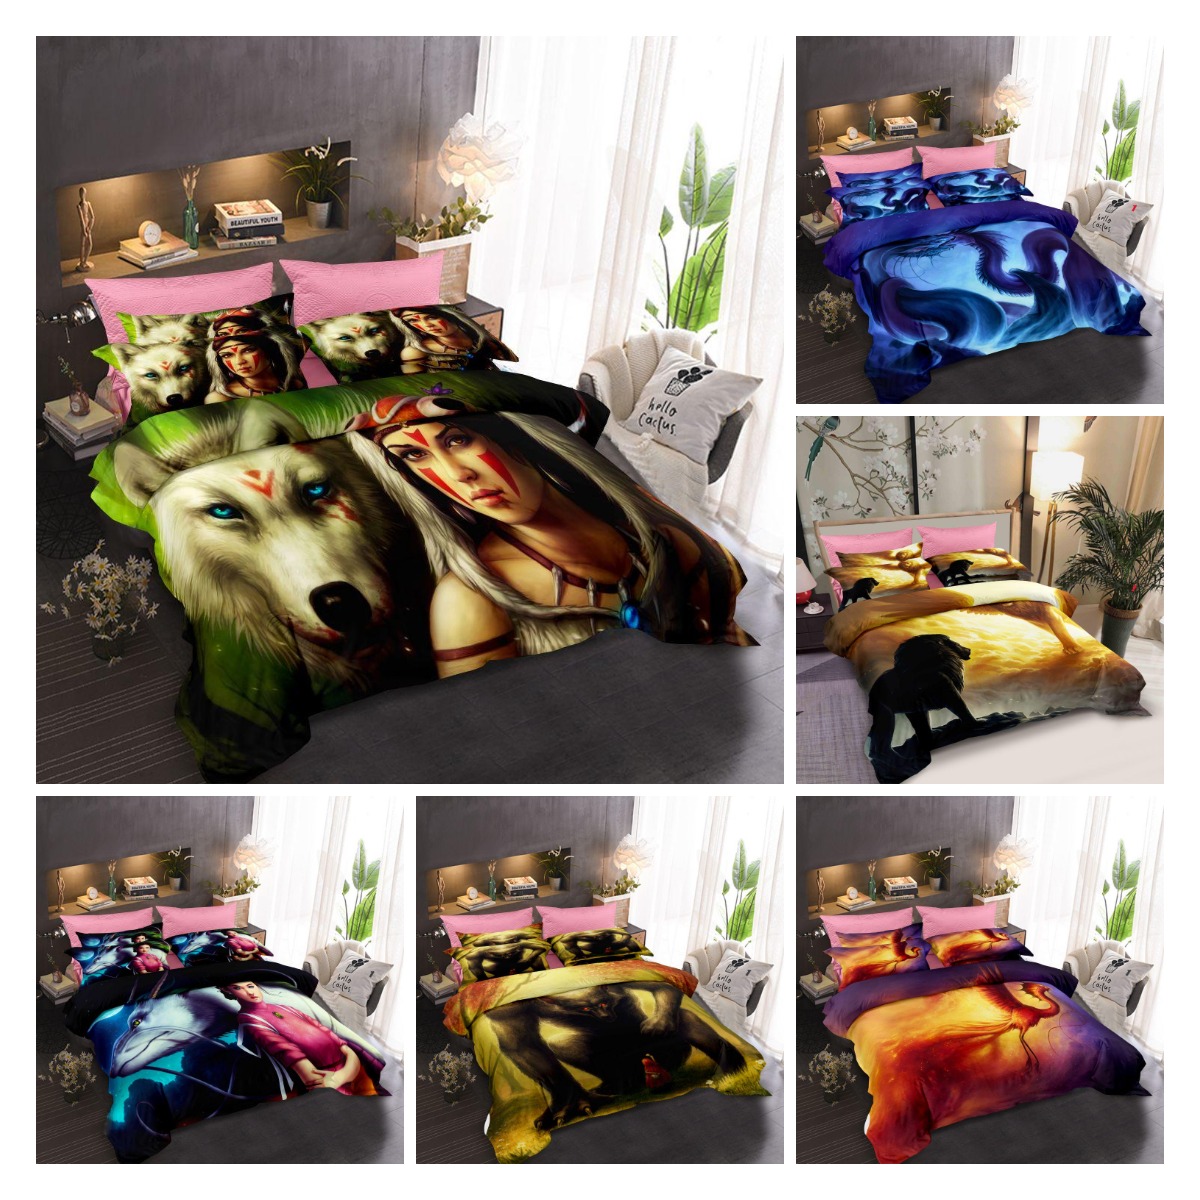 Bedding Sets Keepers Of The Universe Theme 3D Digital Printing Duvet Cover Set 3 PCS European and American Style Polyester Super Soft Quilt Cover with Pillowcase